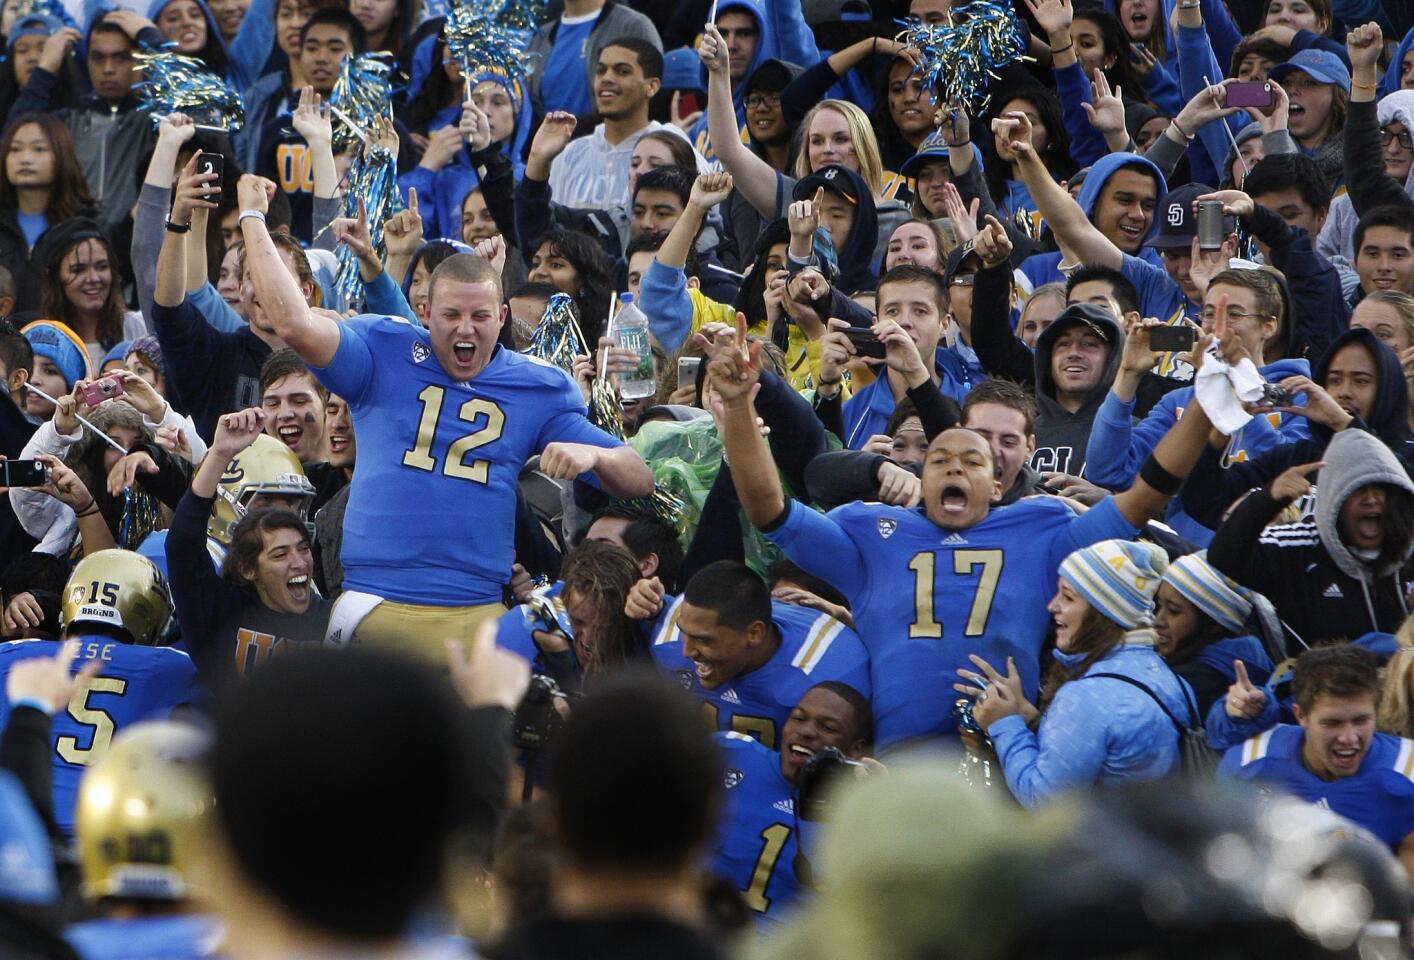 Bruins quarterbacks Richard Brehaut (12) and Brett Hundley (17) celebrate with fans after their 38-28 victory over the Trojans on Saturday at the Rose Bowl.